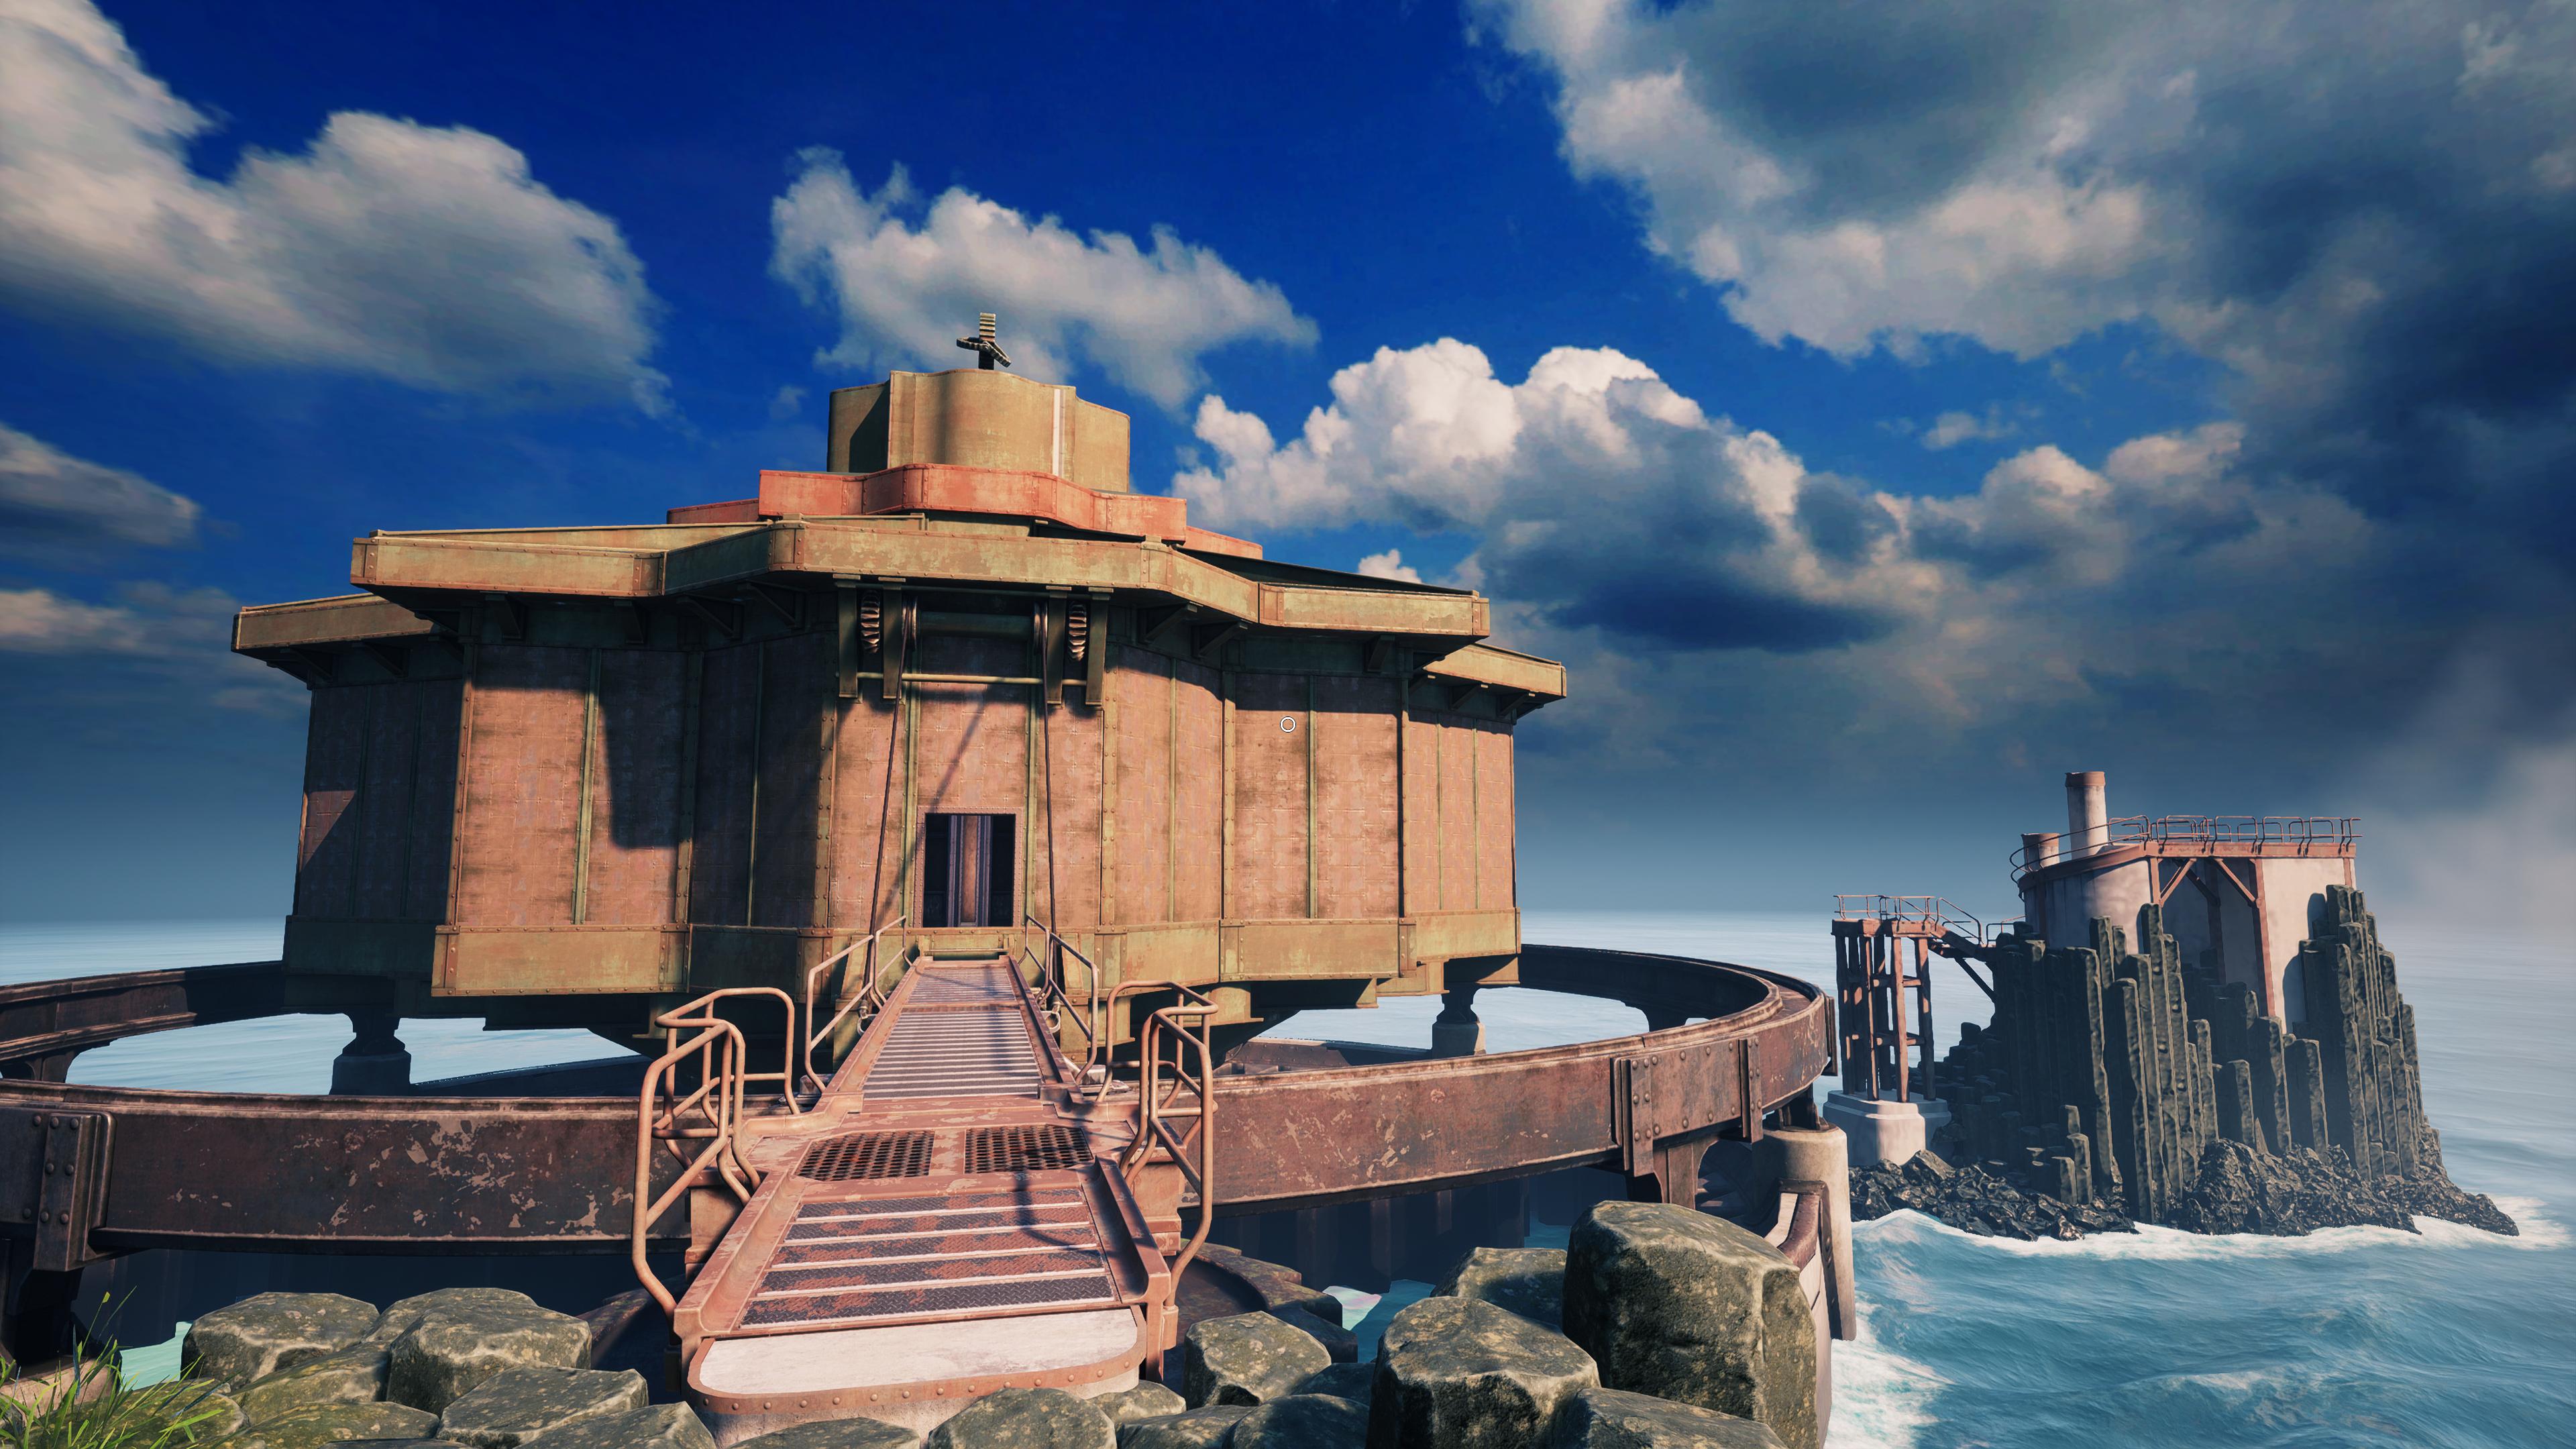 download the new for ios Myst